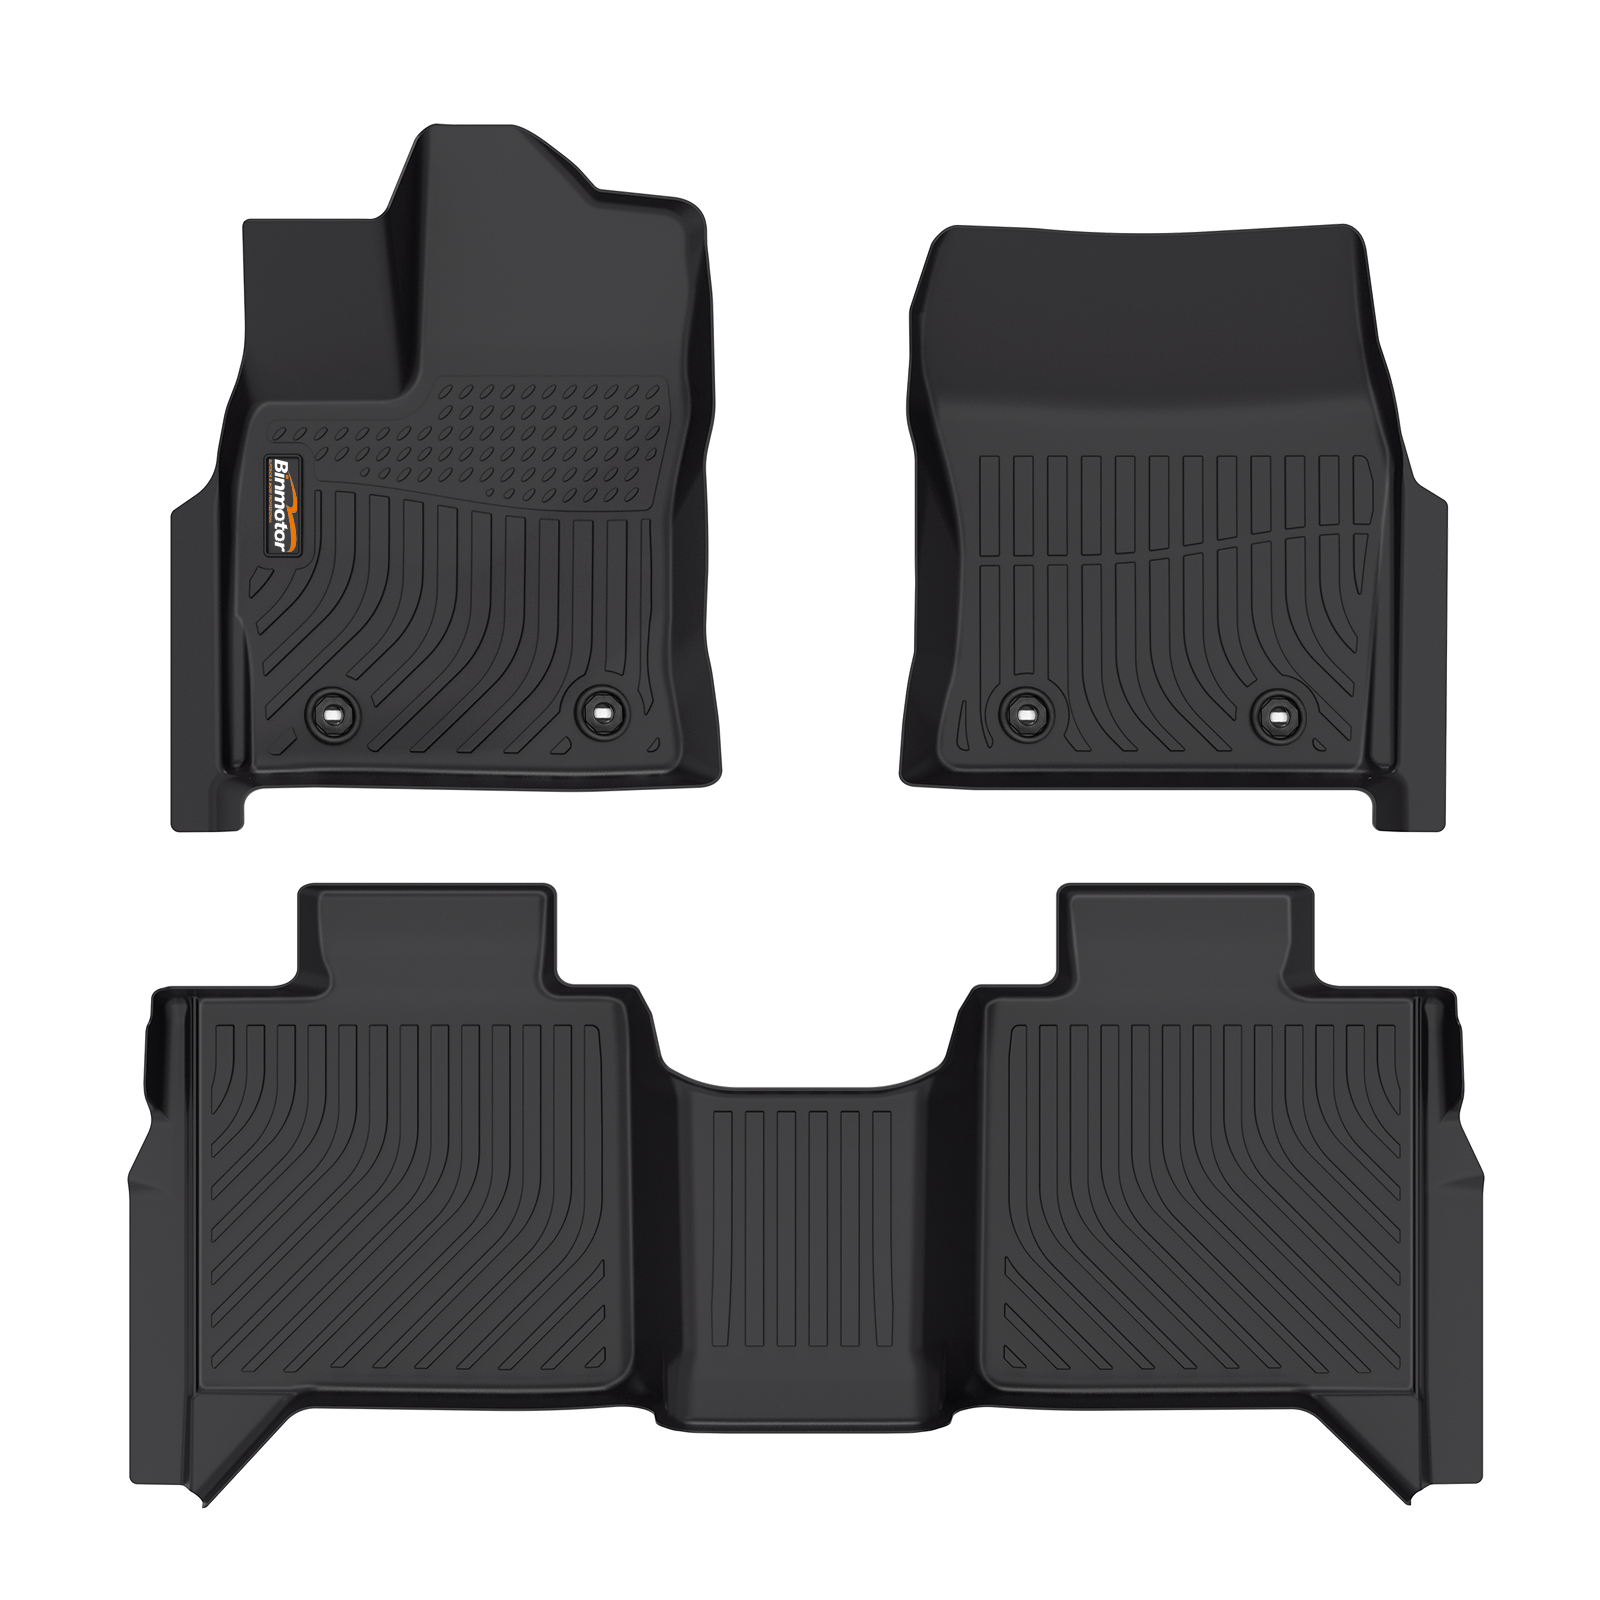 Binmotor- Floor Mats for Toyota Tundra Crewmax，Front & 2nd Row，TPE All Weather Car Accessories Mats for Toyota Tundra Crewmax，Custom Fit for Tundra Crewmax Floor Liners Waterproof, Nonslip (compatible year 2022-2023)